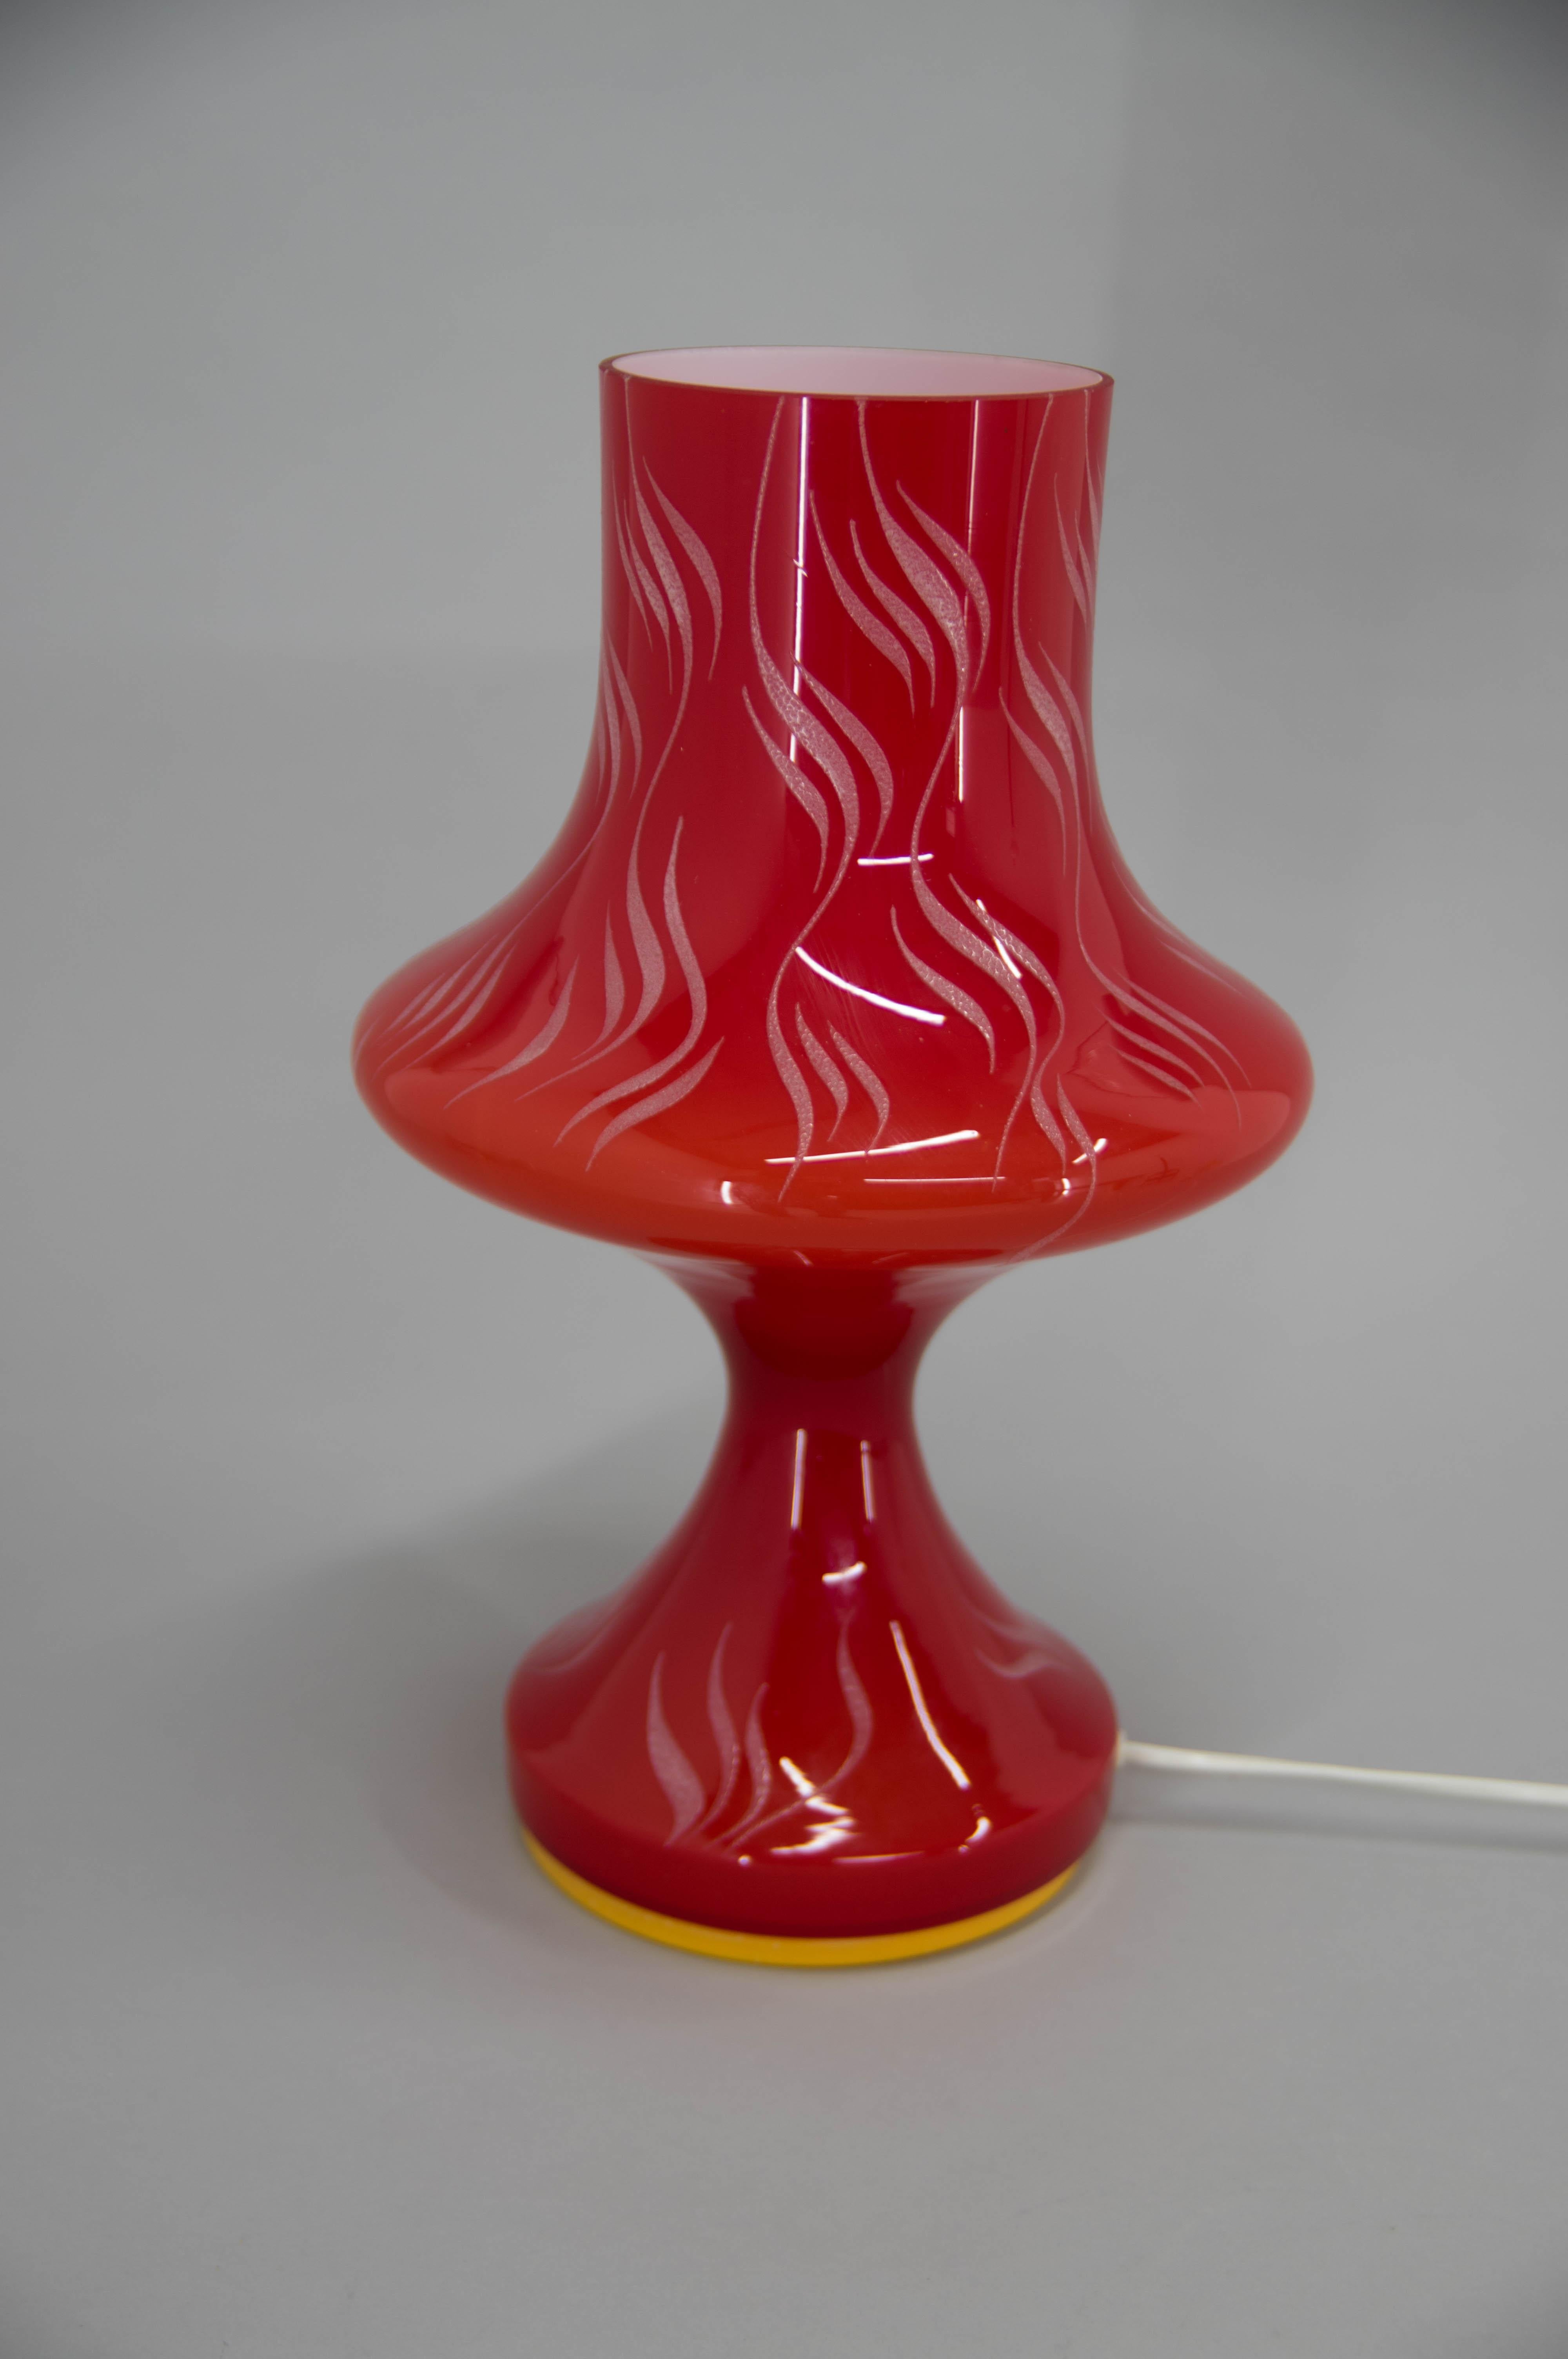 Czech All Glass Red Table Lamp by Valasske Mezirici, 1970s For Sale